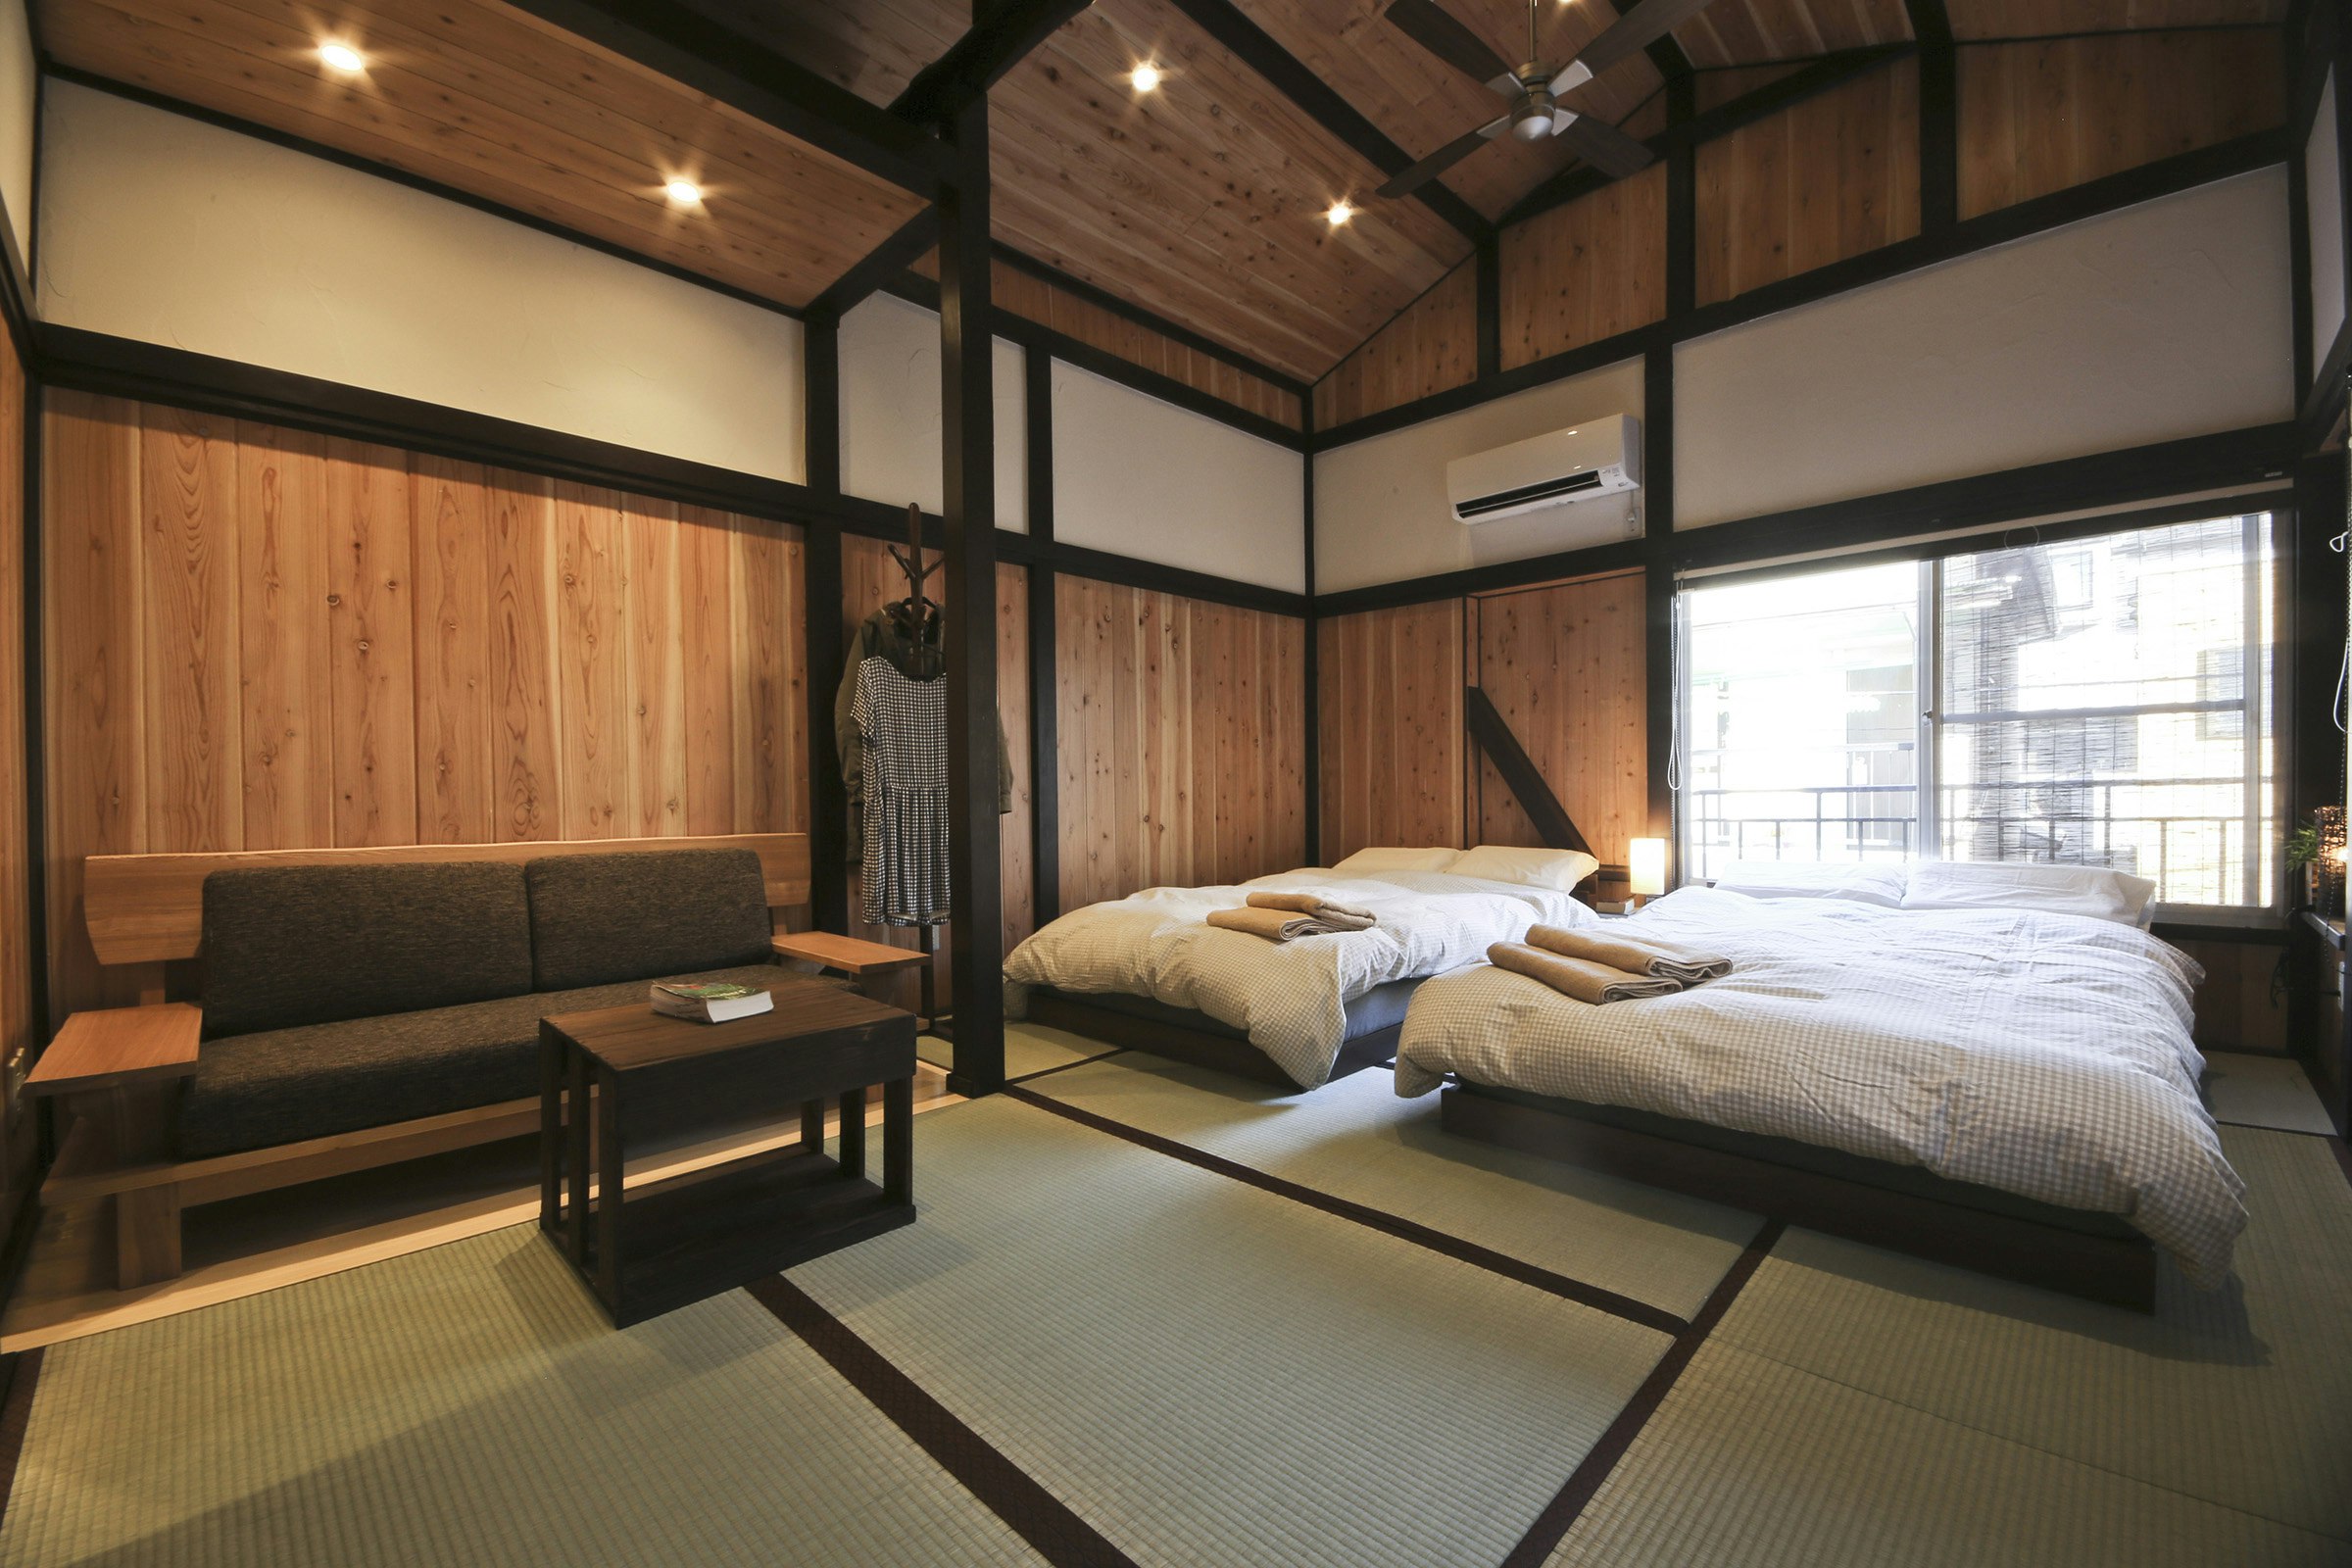 A traditional room in Japan with futon beds 